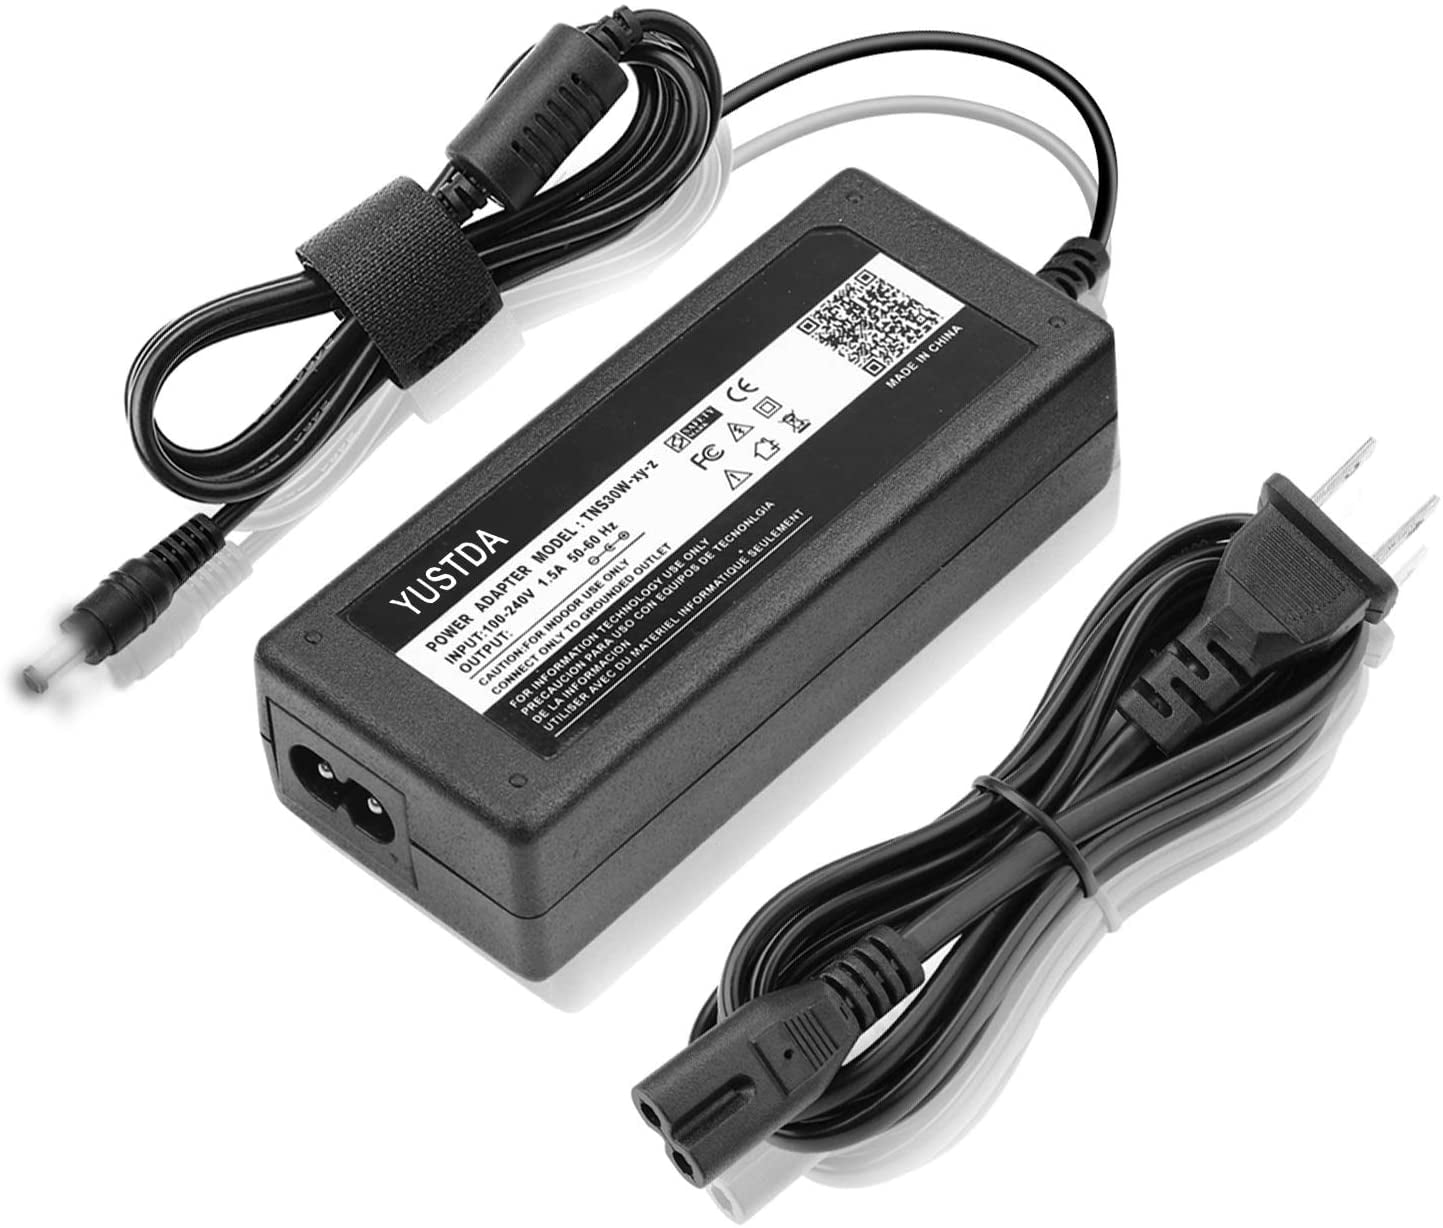 Fortolke skruenøgle Anmelder YUSTDA AC/DC Adapter Replacement For HP Sprocket Studio 3MP72A Photo Printer  Power Supply Cord Cable Charger Mains PSU - Walmart.com